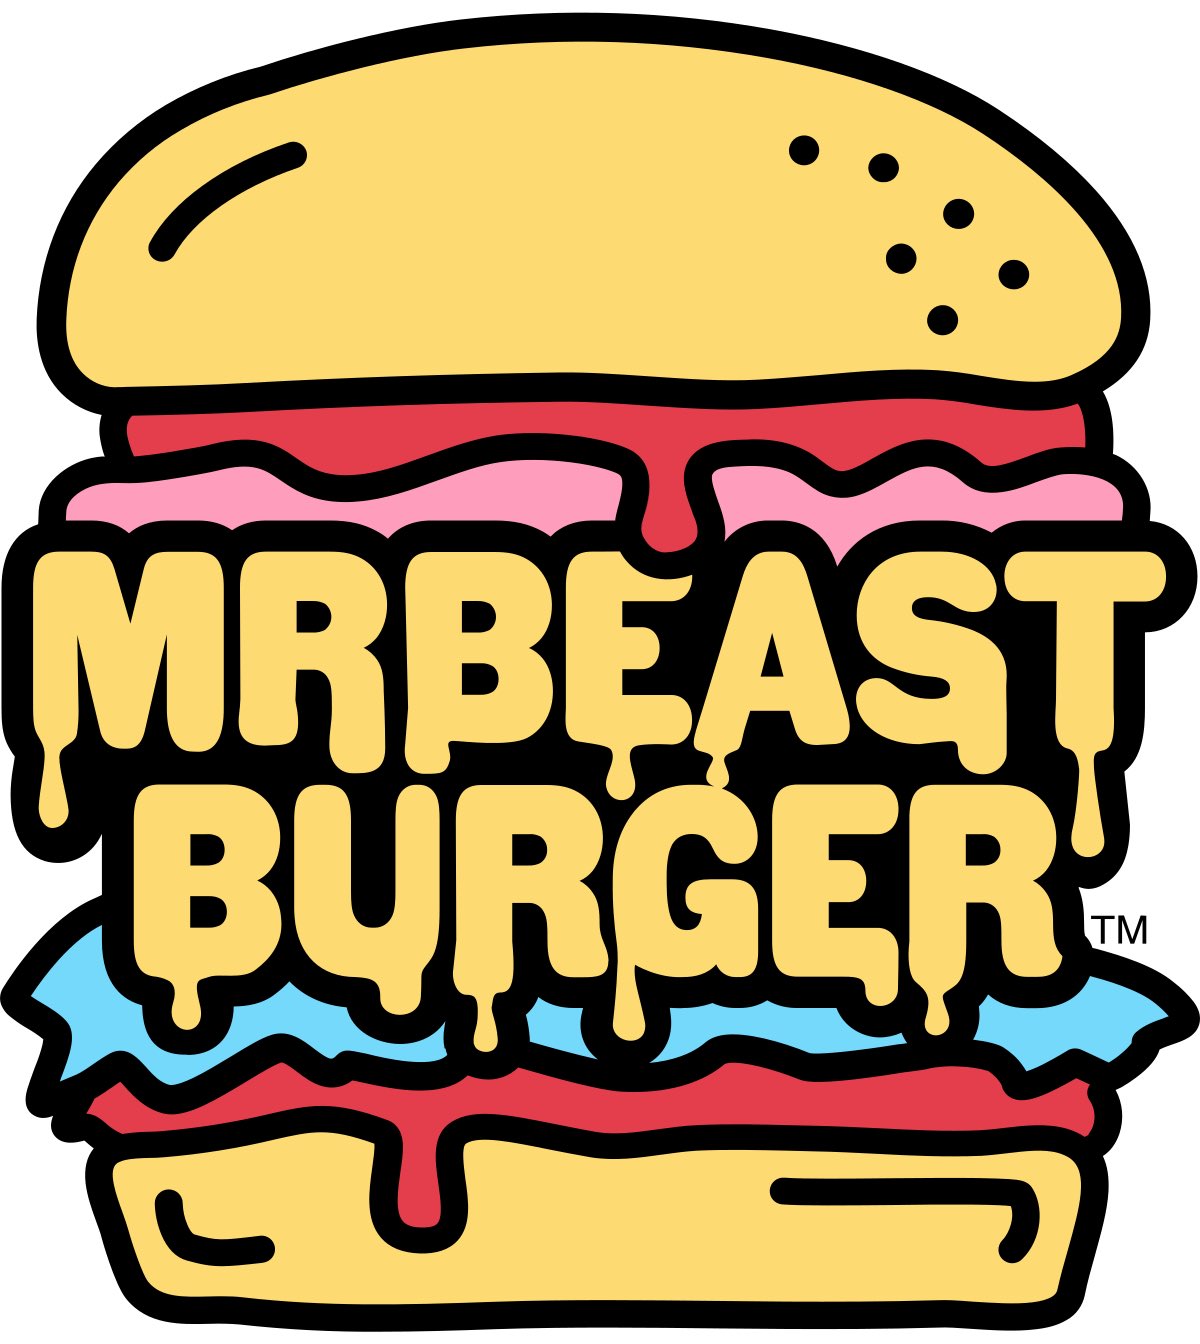 Virtual Restaurant Firm Sued by MrBeast Over 'Inedible' Burgers Responds:  'Meritless' Lawsuit Came After His 'Bullying Tactics' to Renegotiate Deal